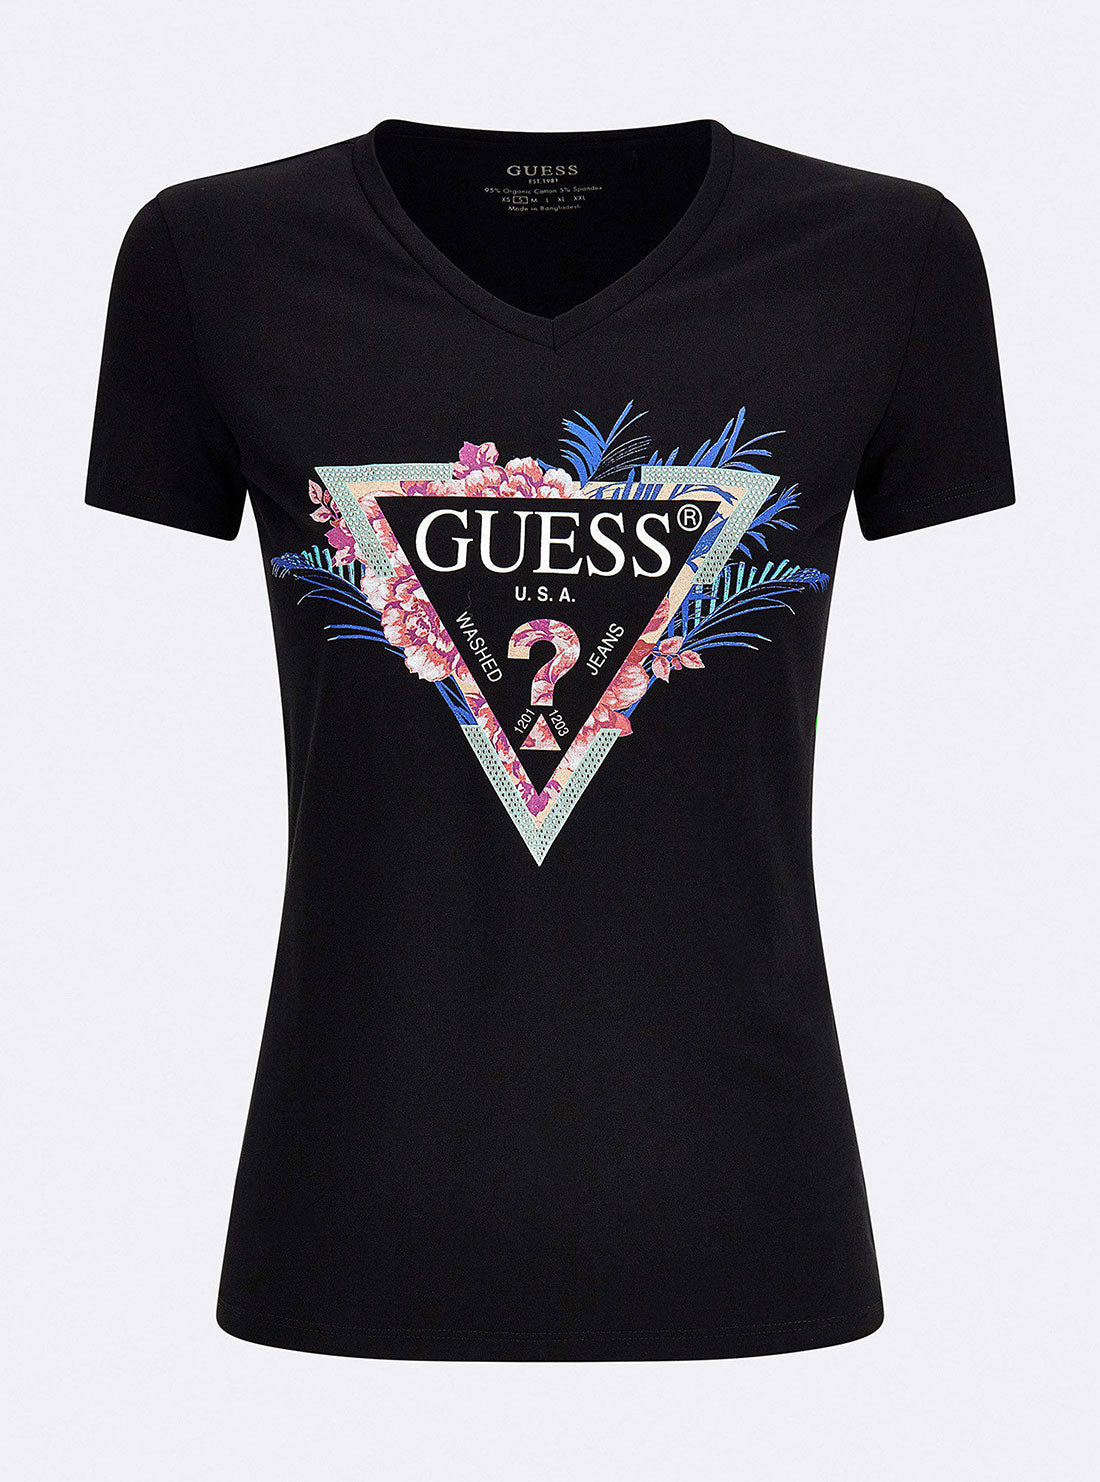 GUESS Womens Black Eco Kathe Logo T-Shirt Ghost Front View